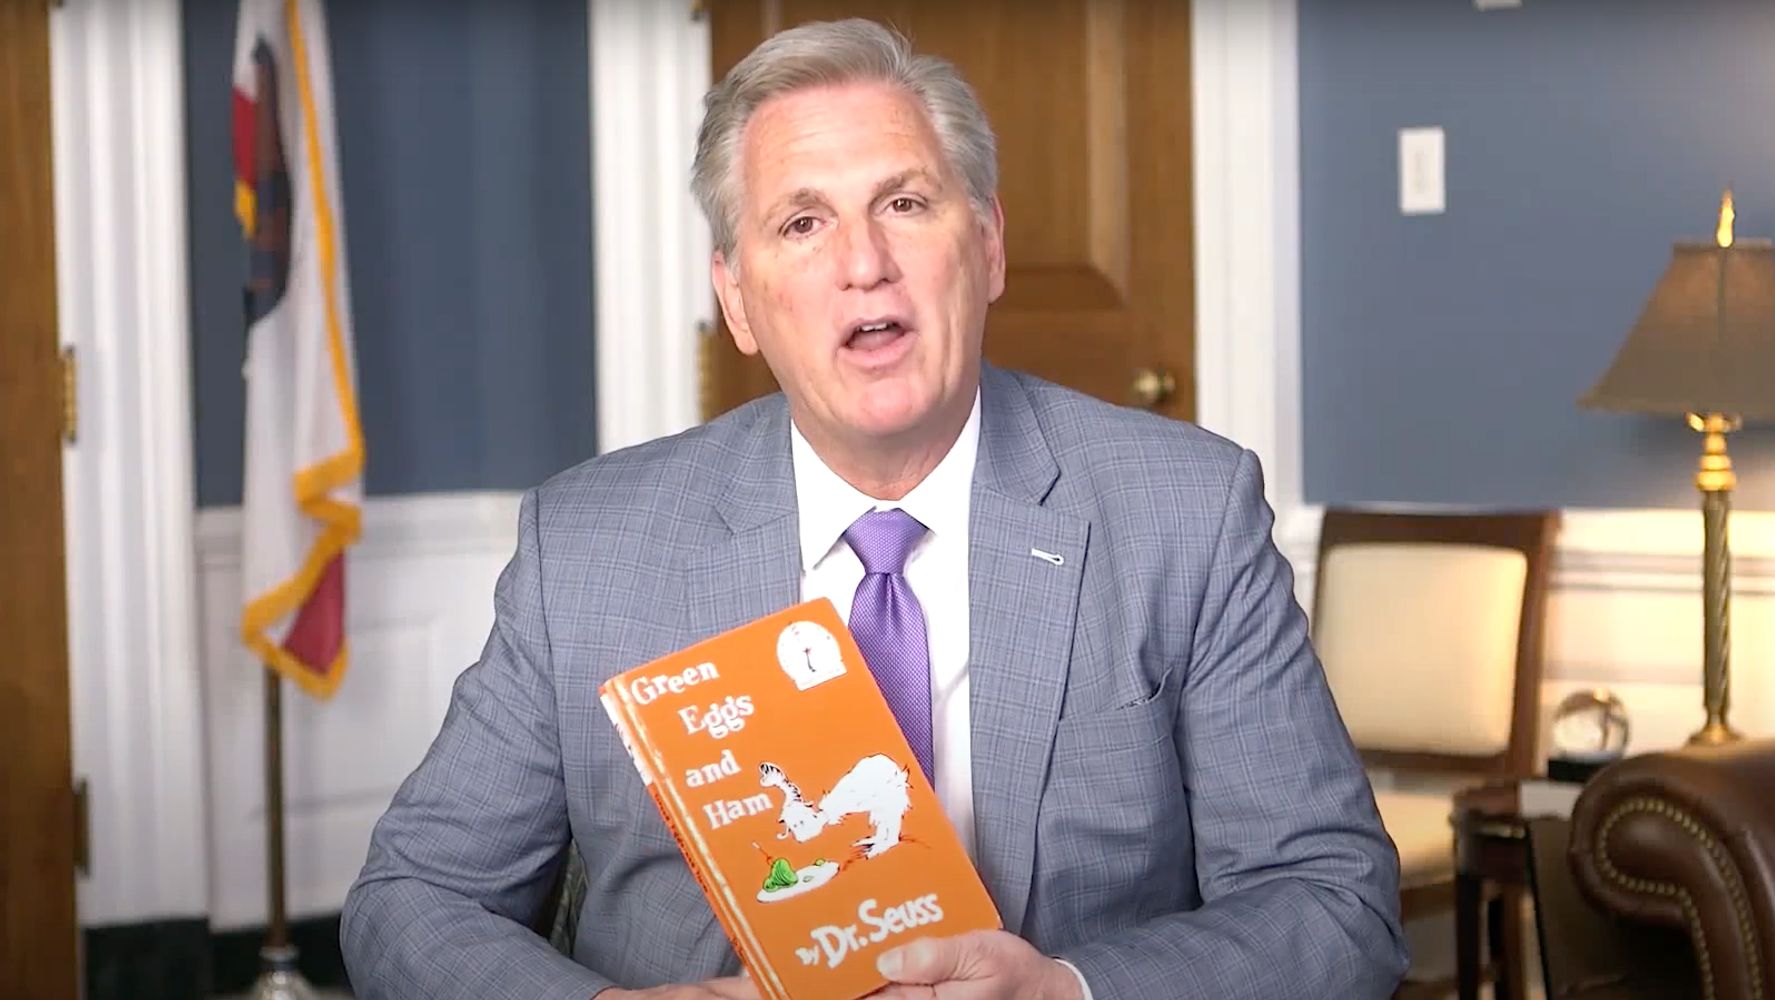 Kevin McCarthy’s Dr. Seuss Falls leaves people very, very confused